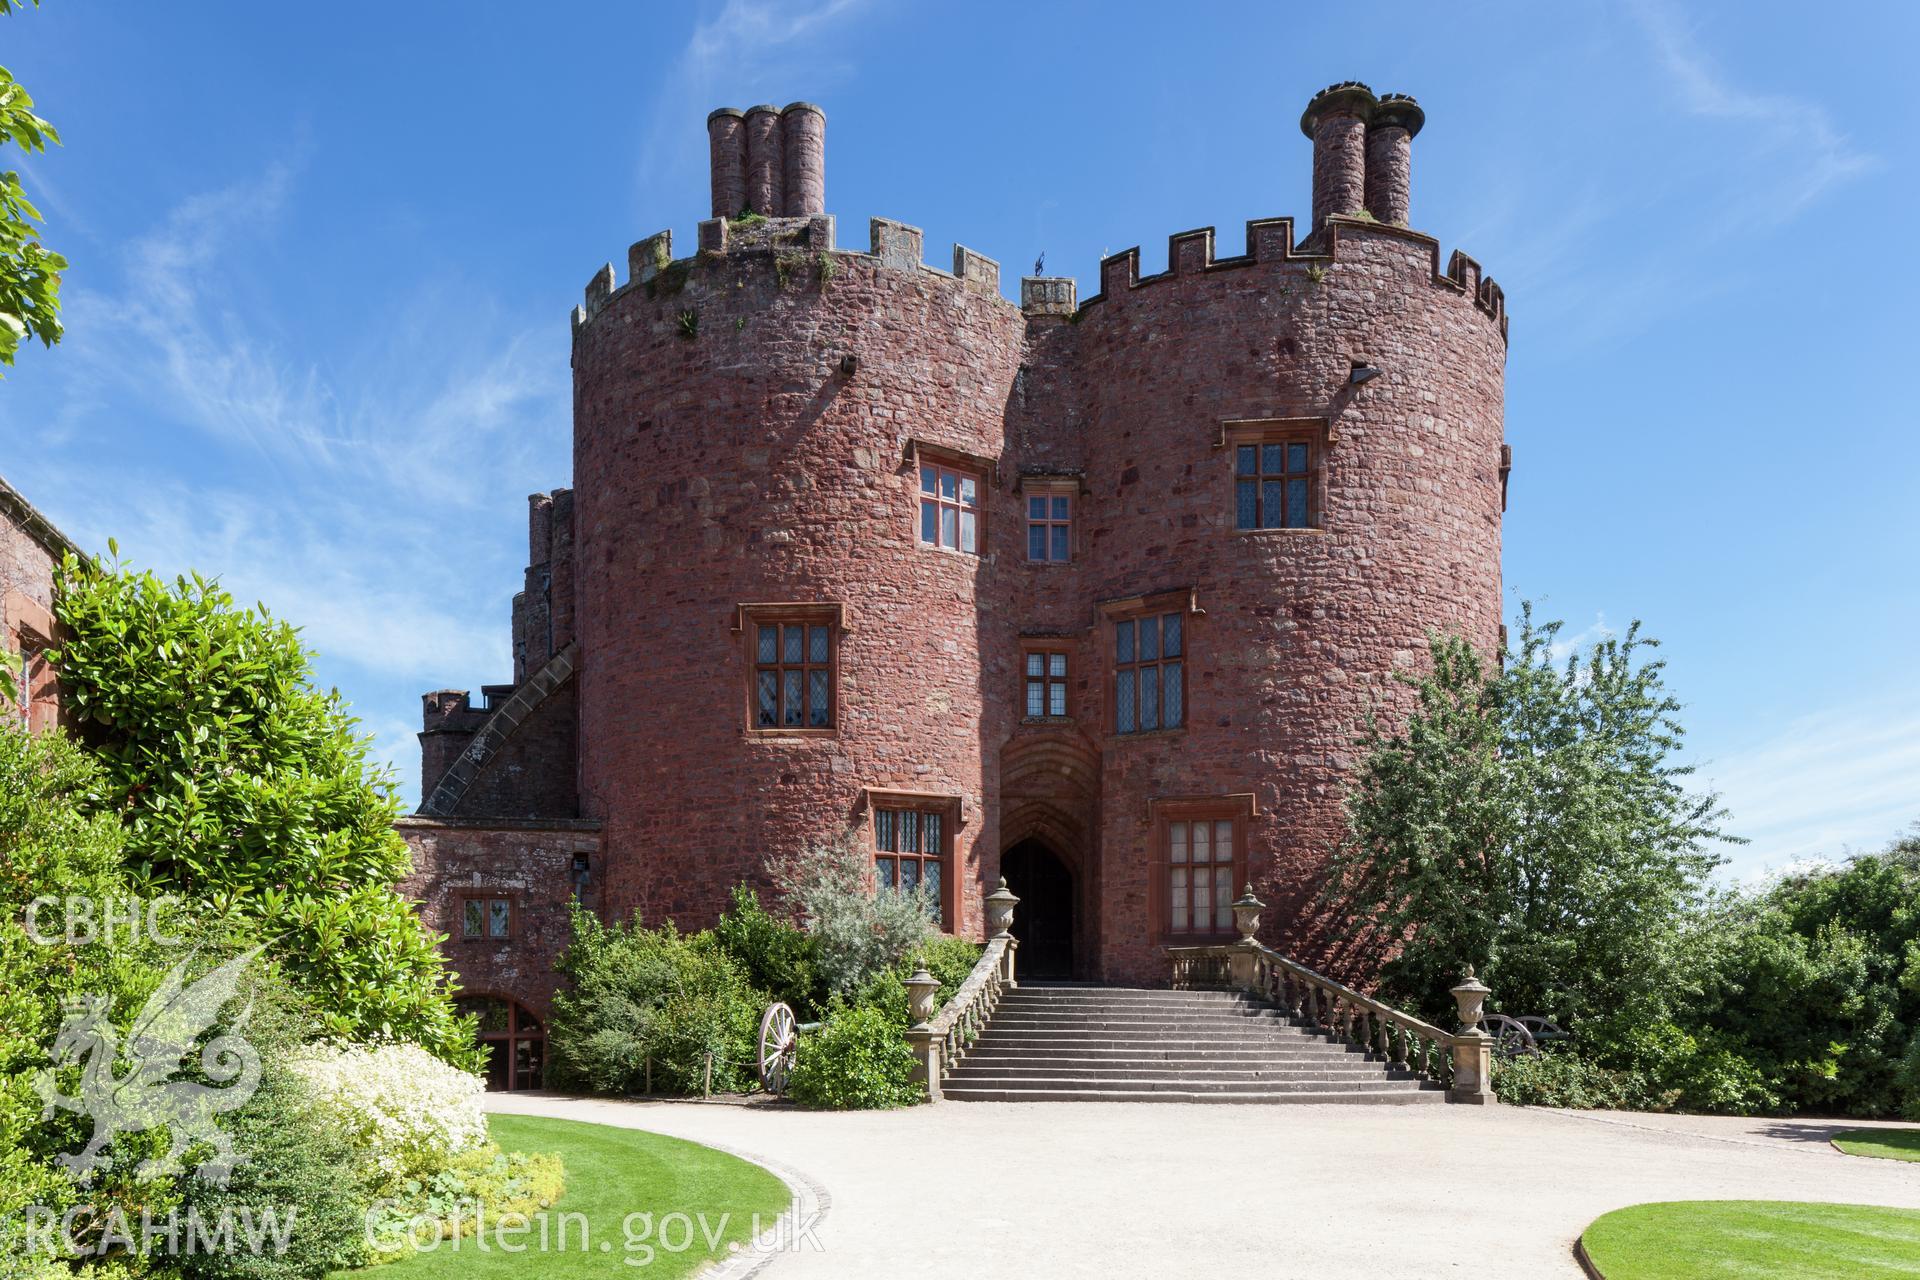 Exterior view of the entrance to Powis Castle. Photographed by Iain N. Wright on 9th August 2012.